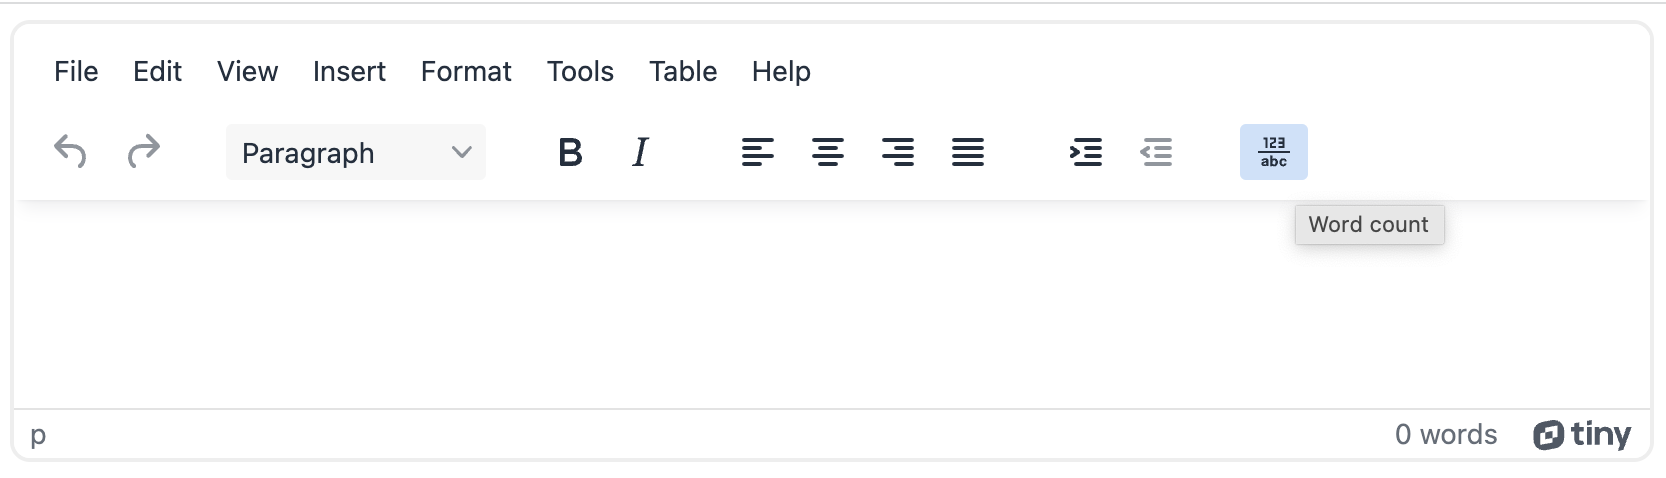 Wordcount plugin added to the Toolbar